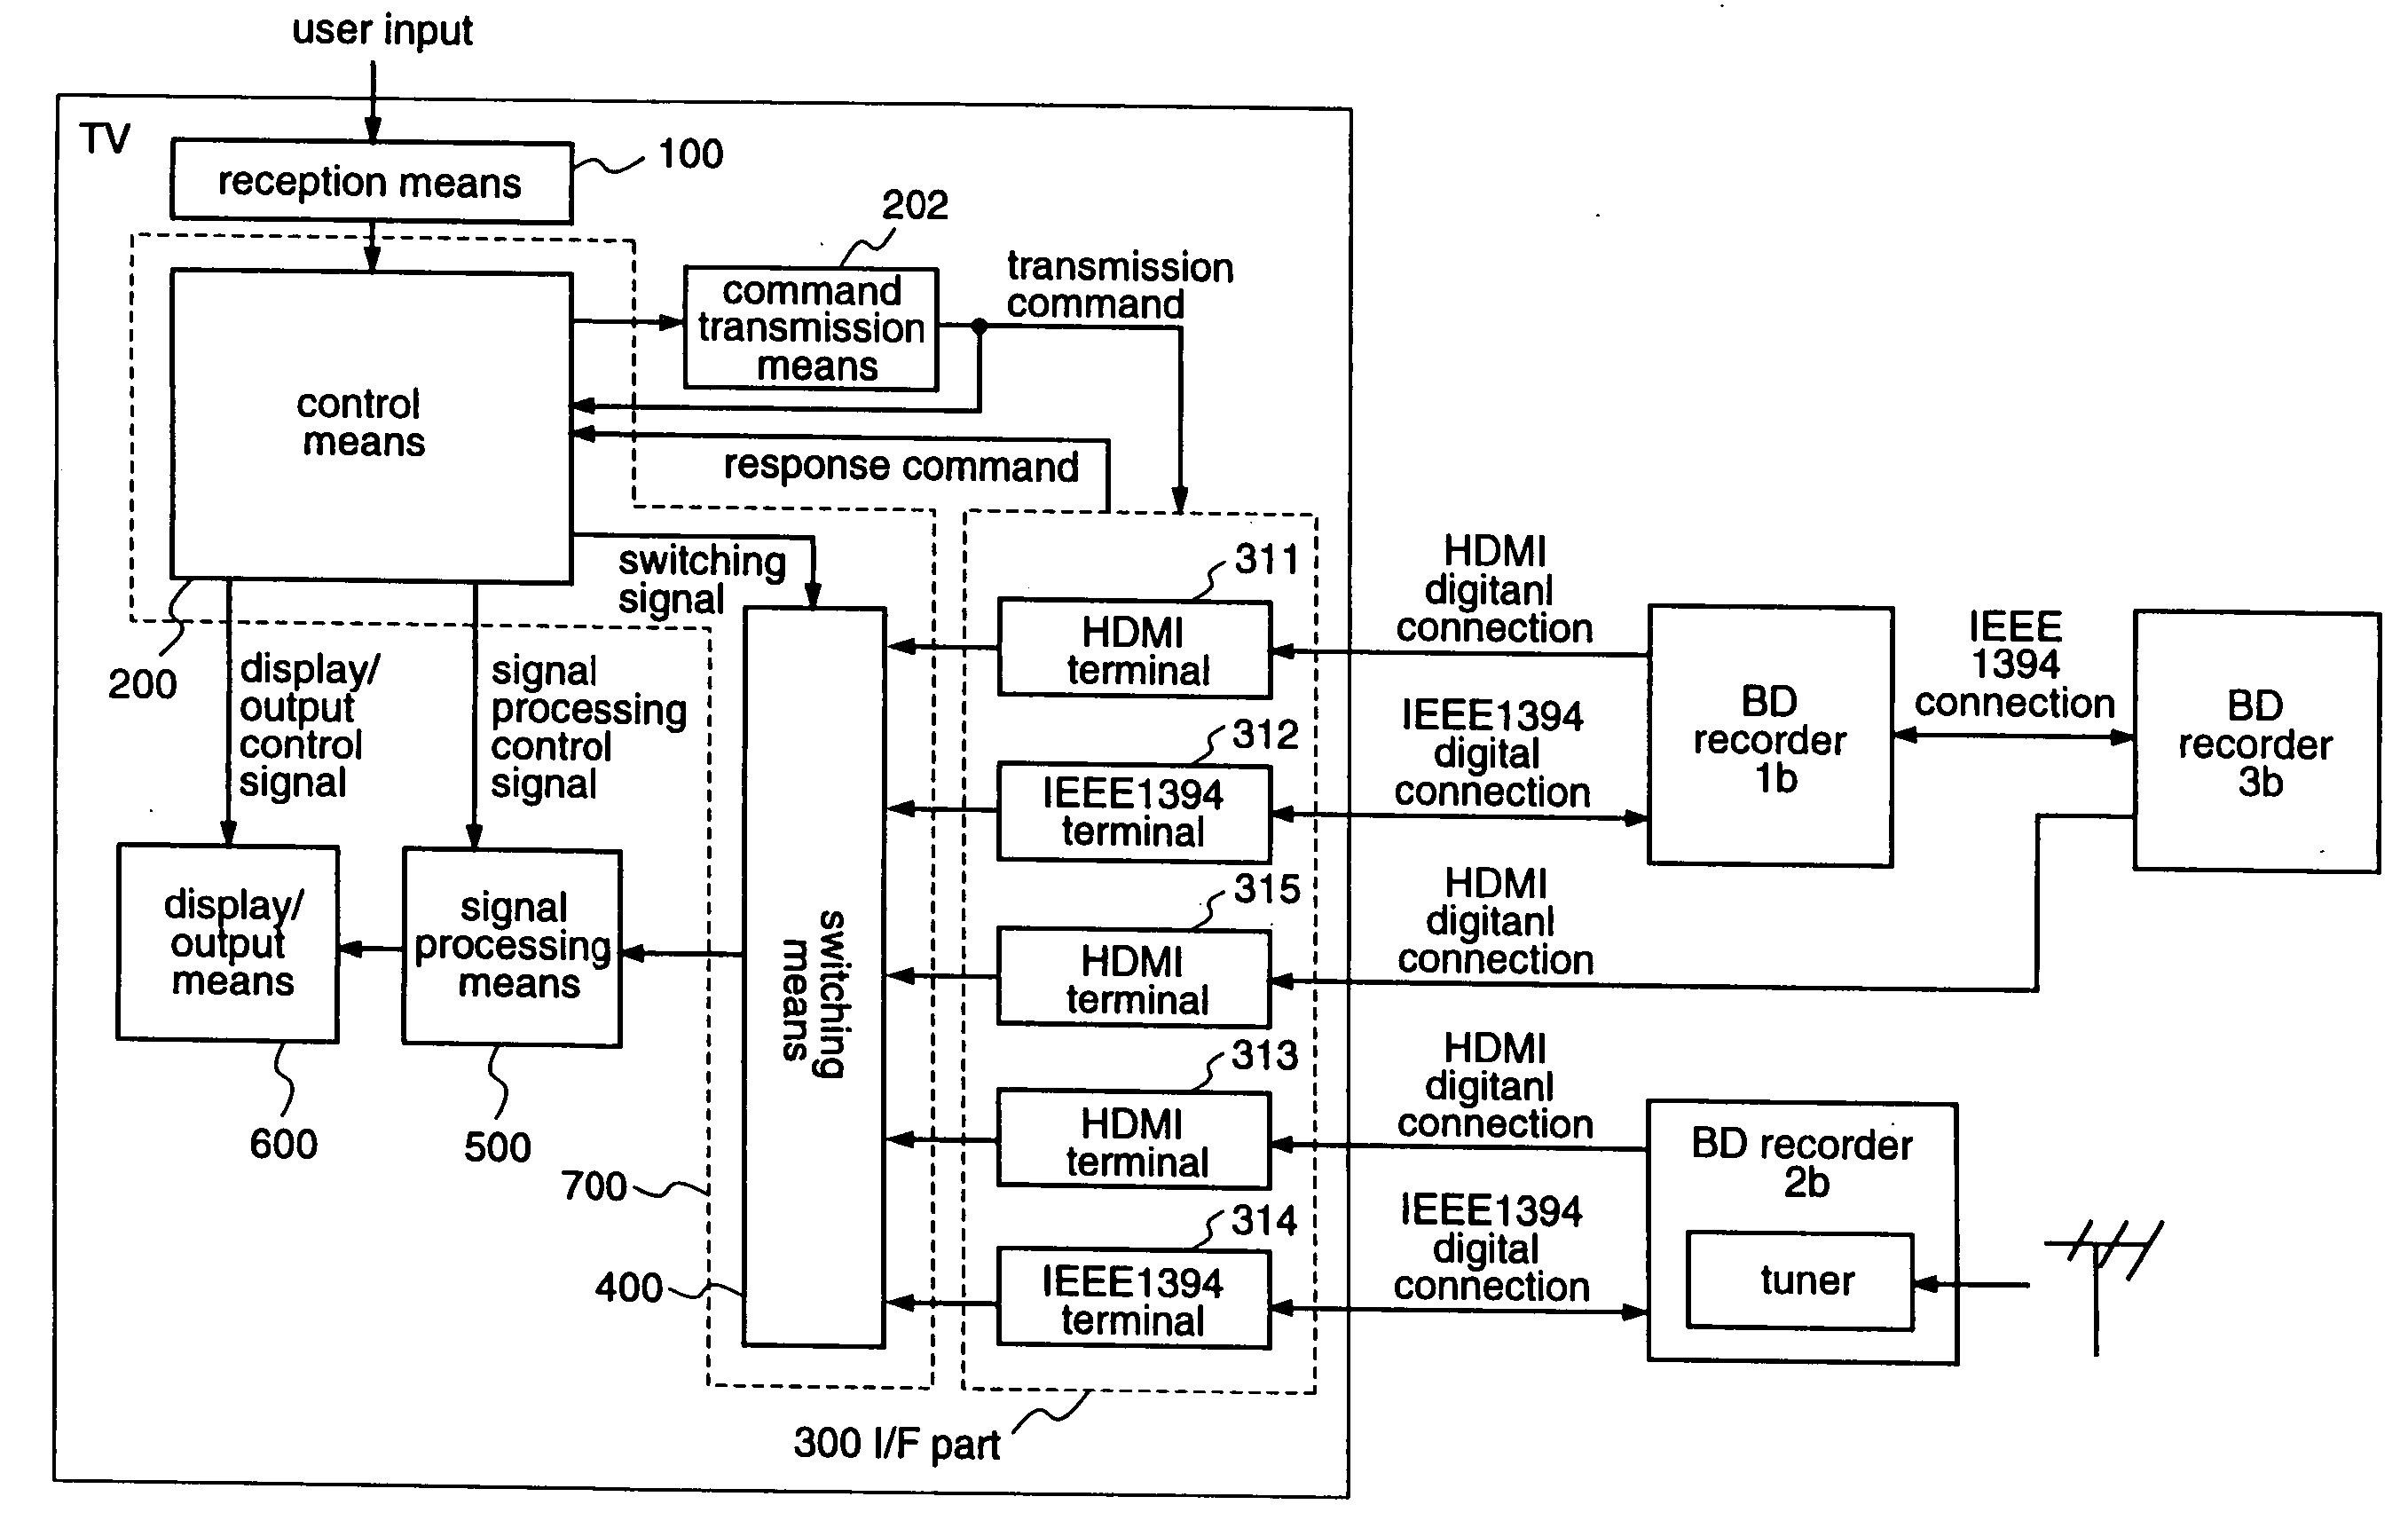 Television receiver and external devices